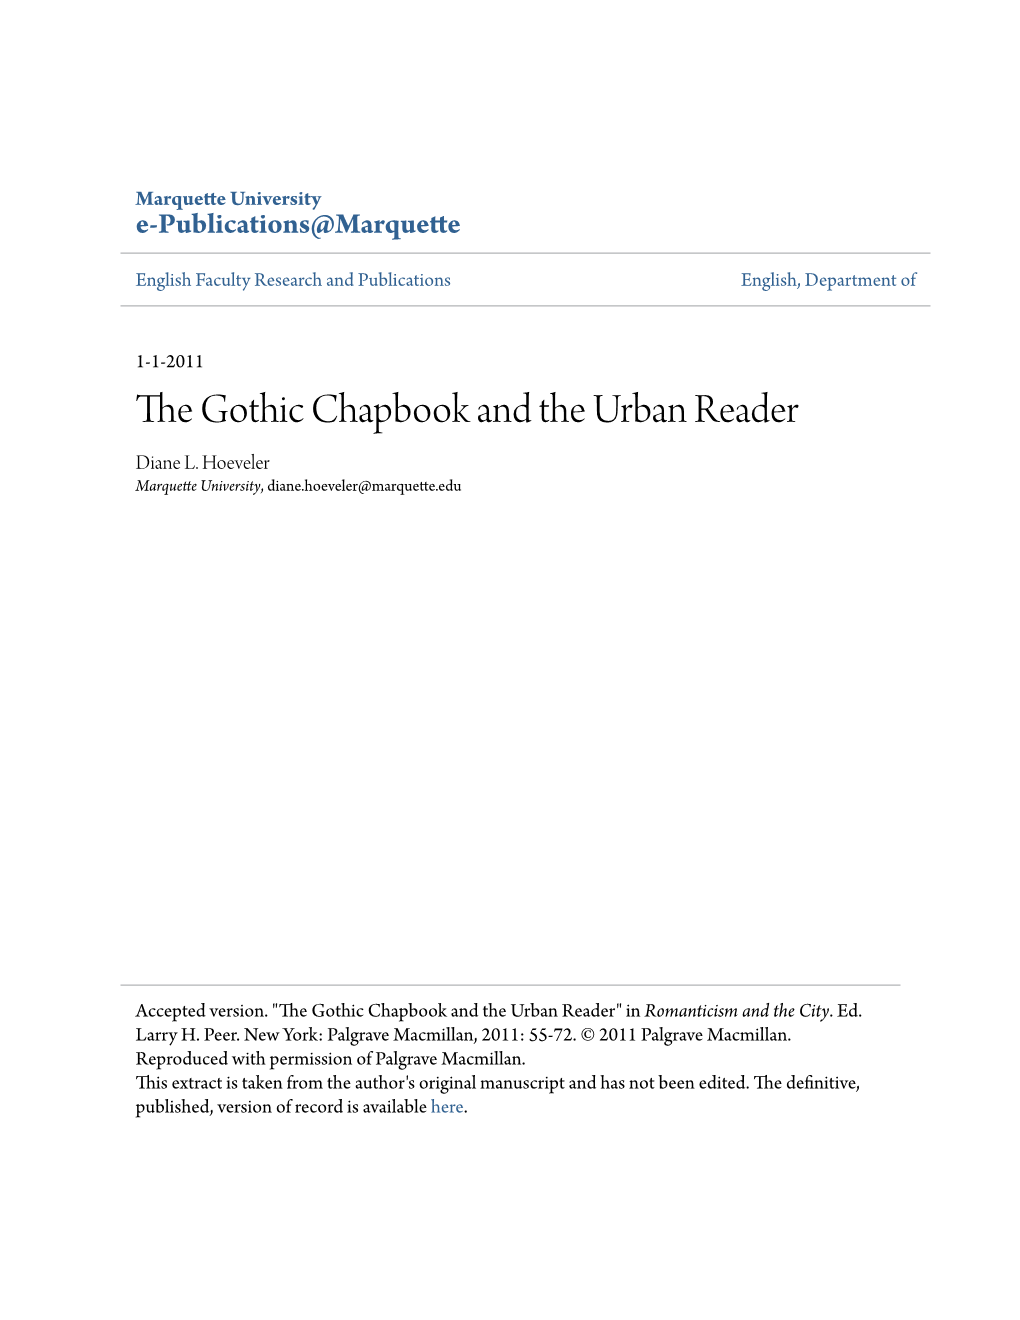 The Gothic Chapbook and the Urban Reader